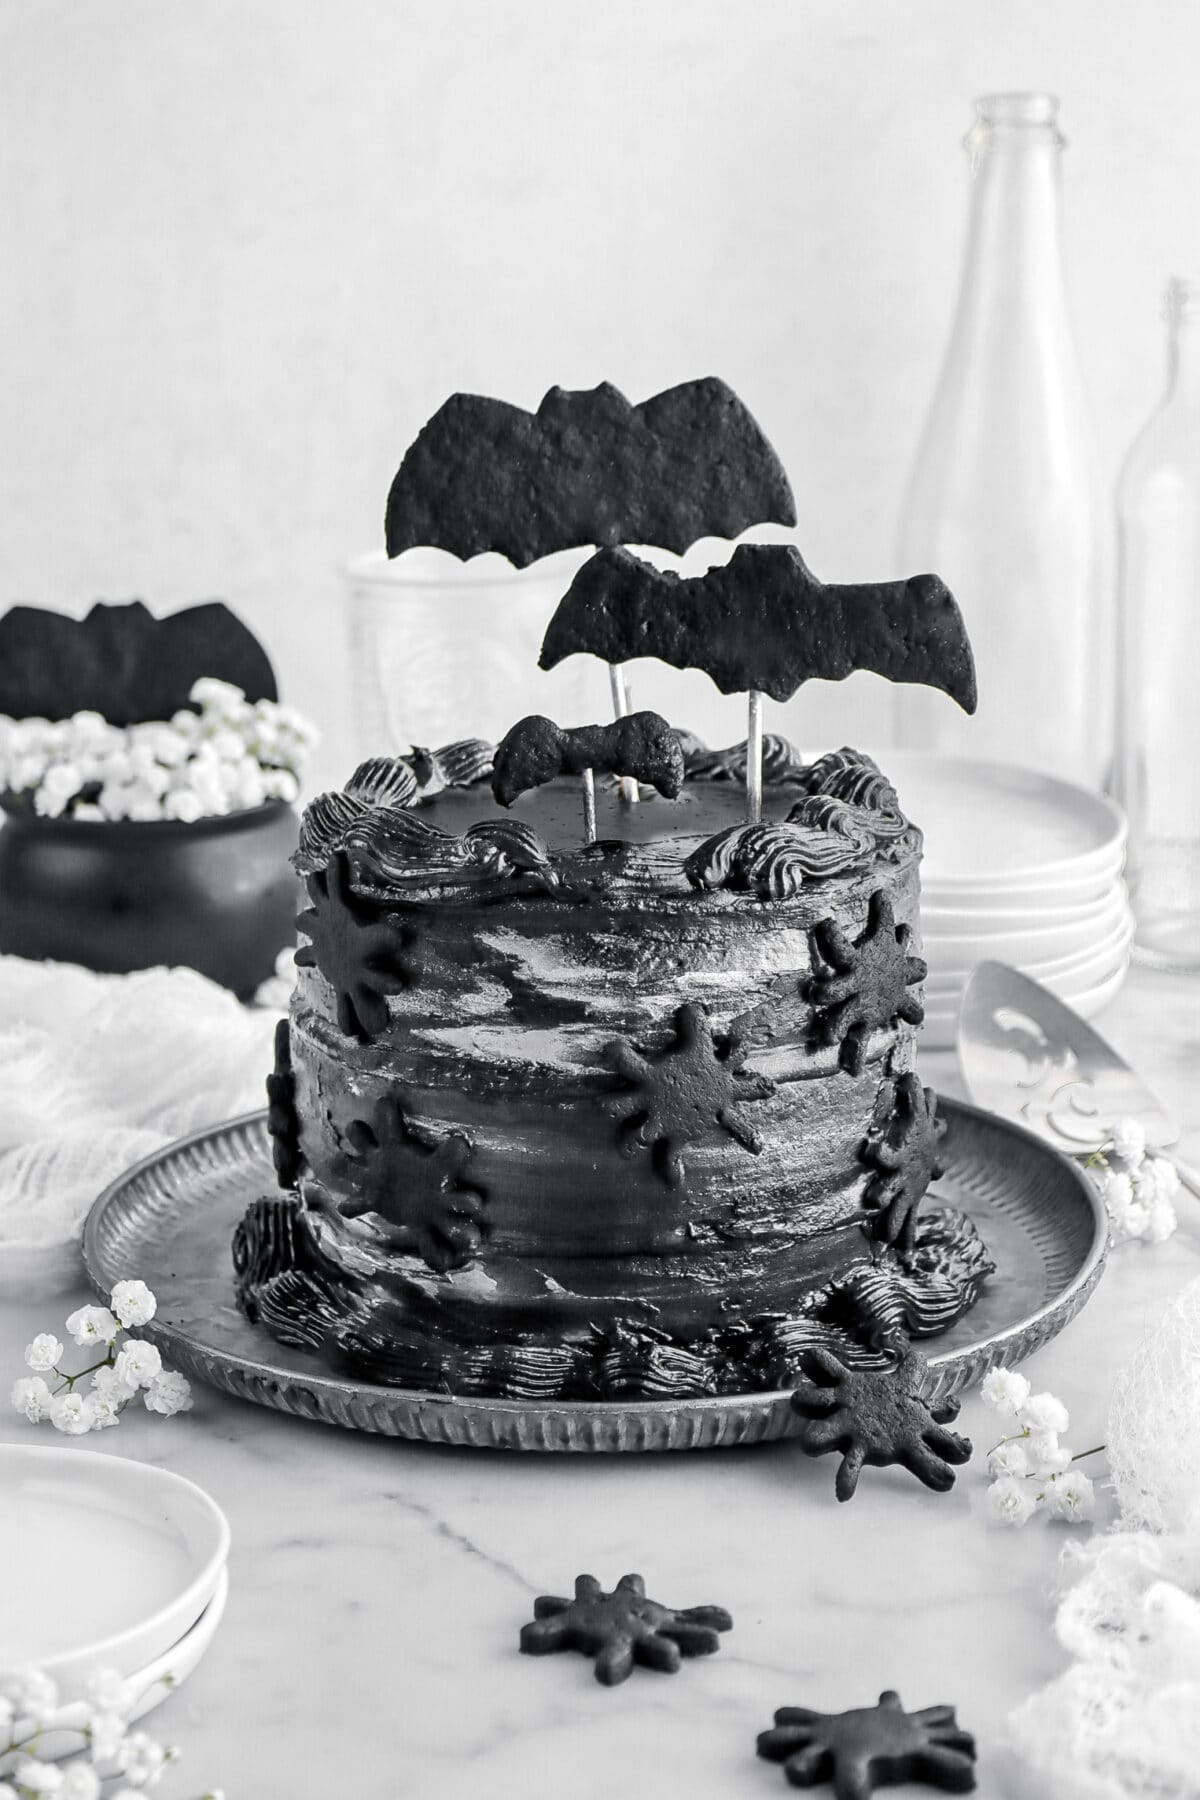 black velvet cake with black bat cookies on top and black spiders on the side with white flowers around, a stack of plates behind, and empty glasses on marble surface.